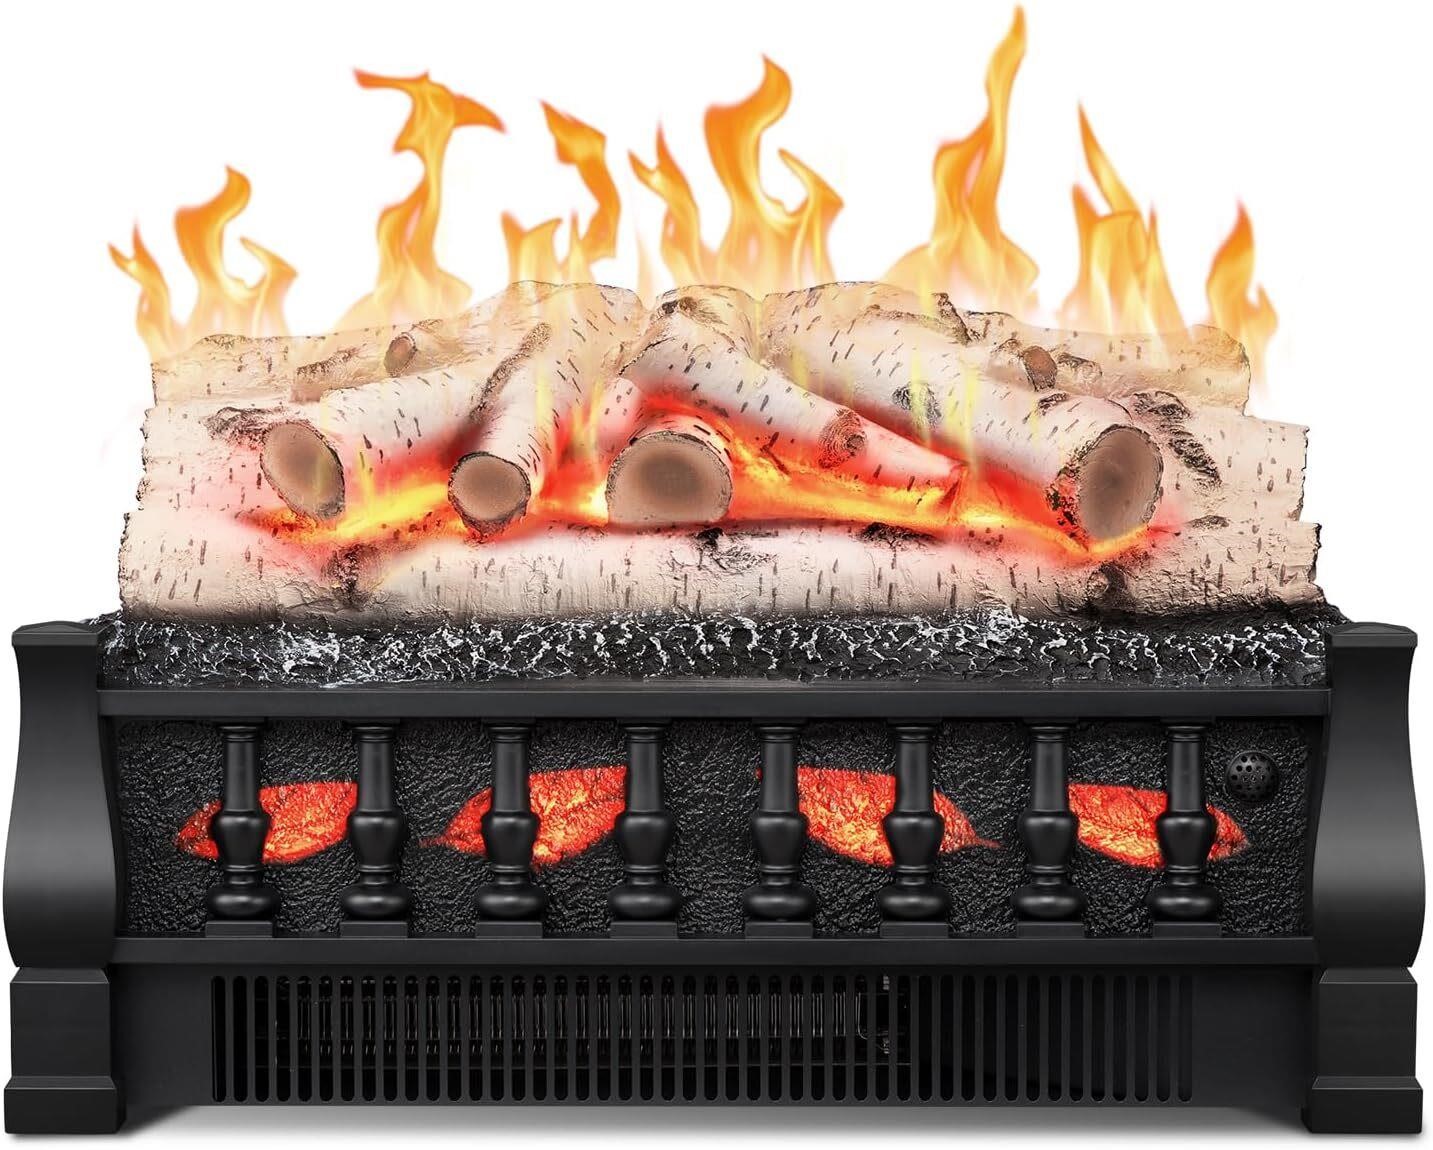 R.W.FLAME 21IN Electric Fireplace Log Set